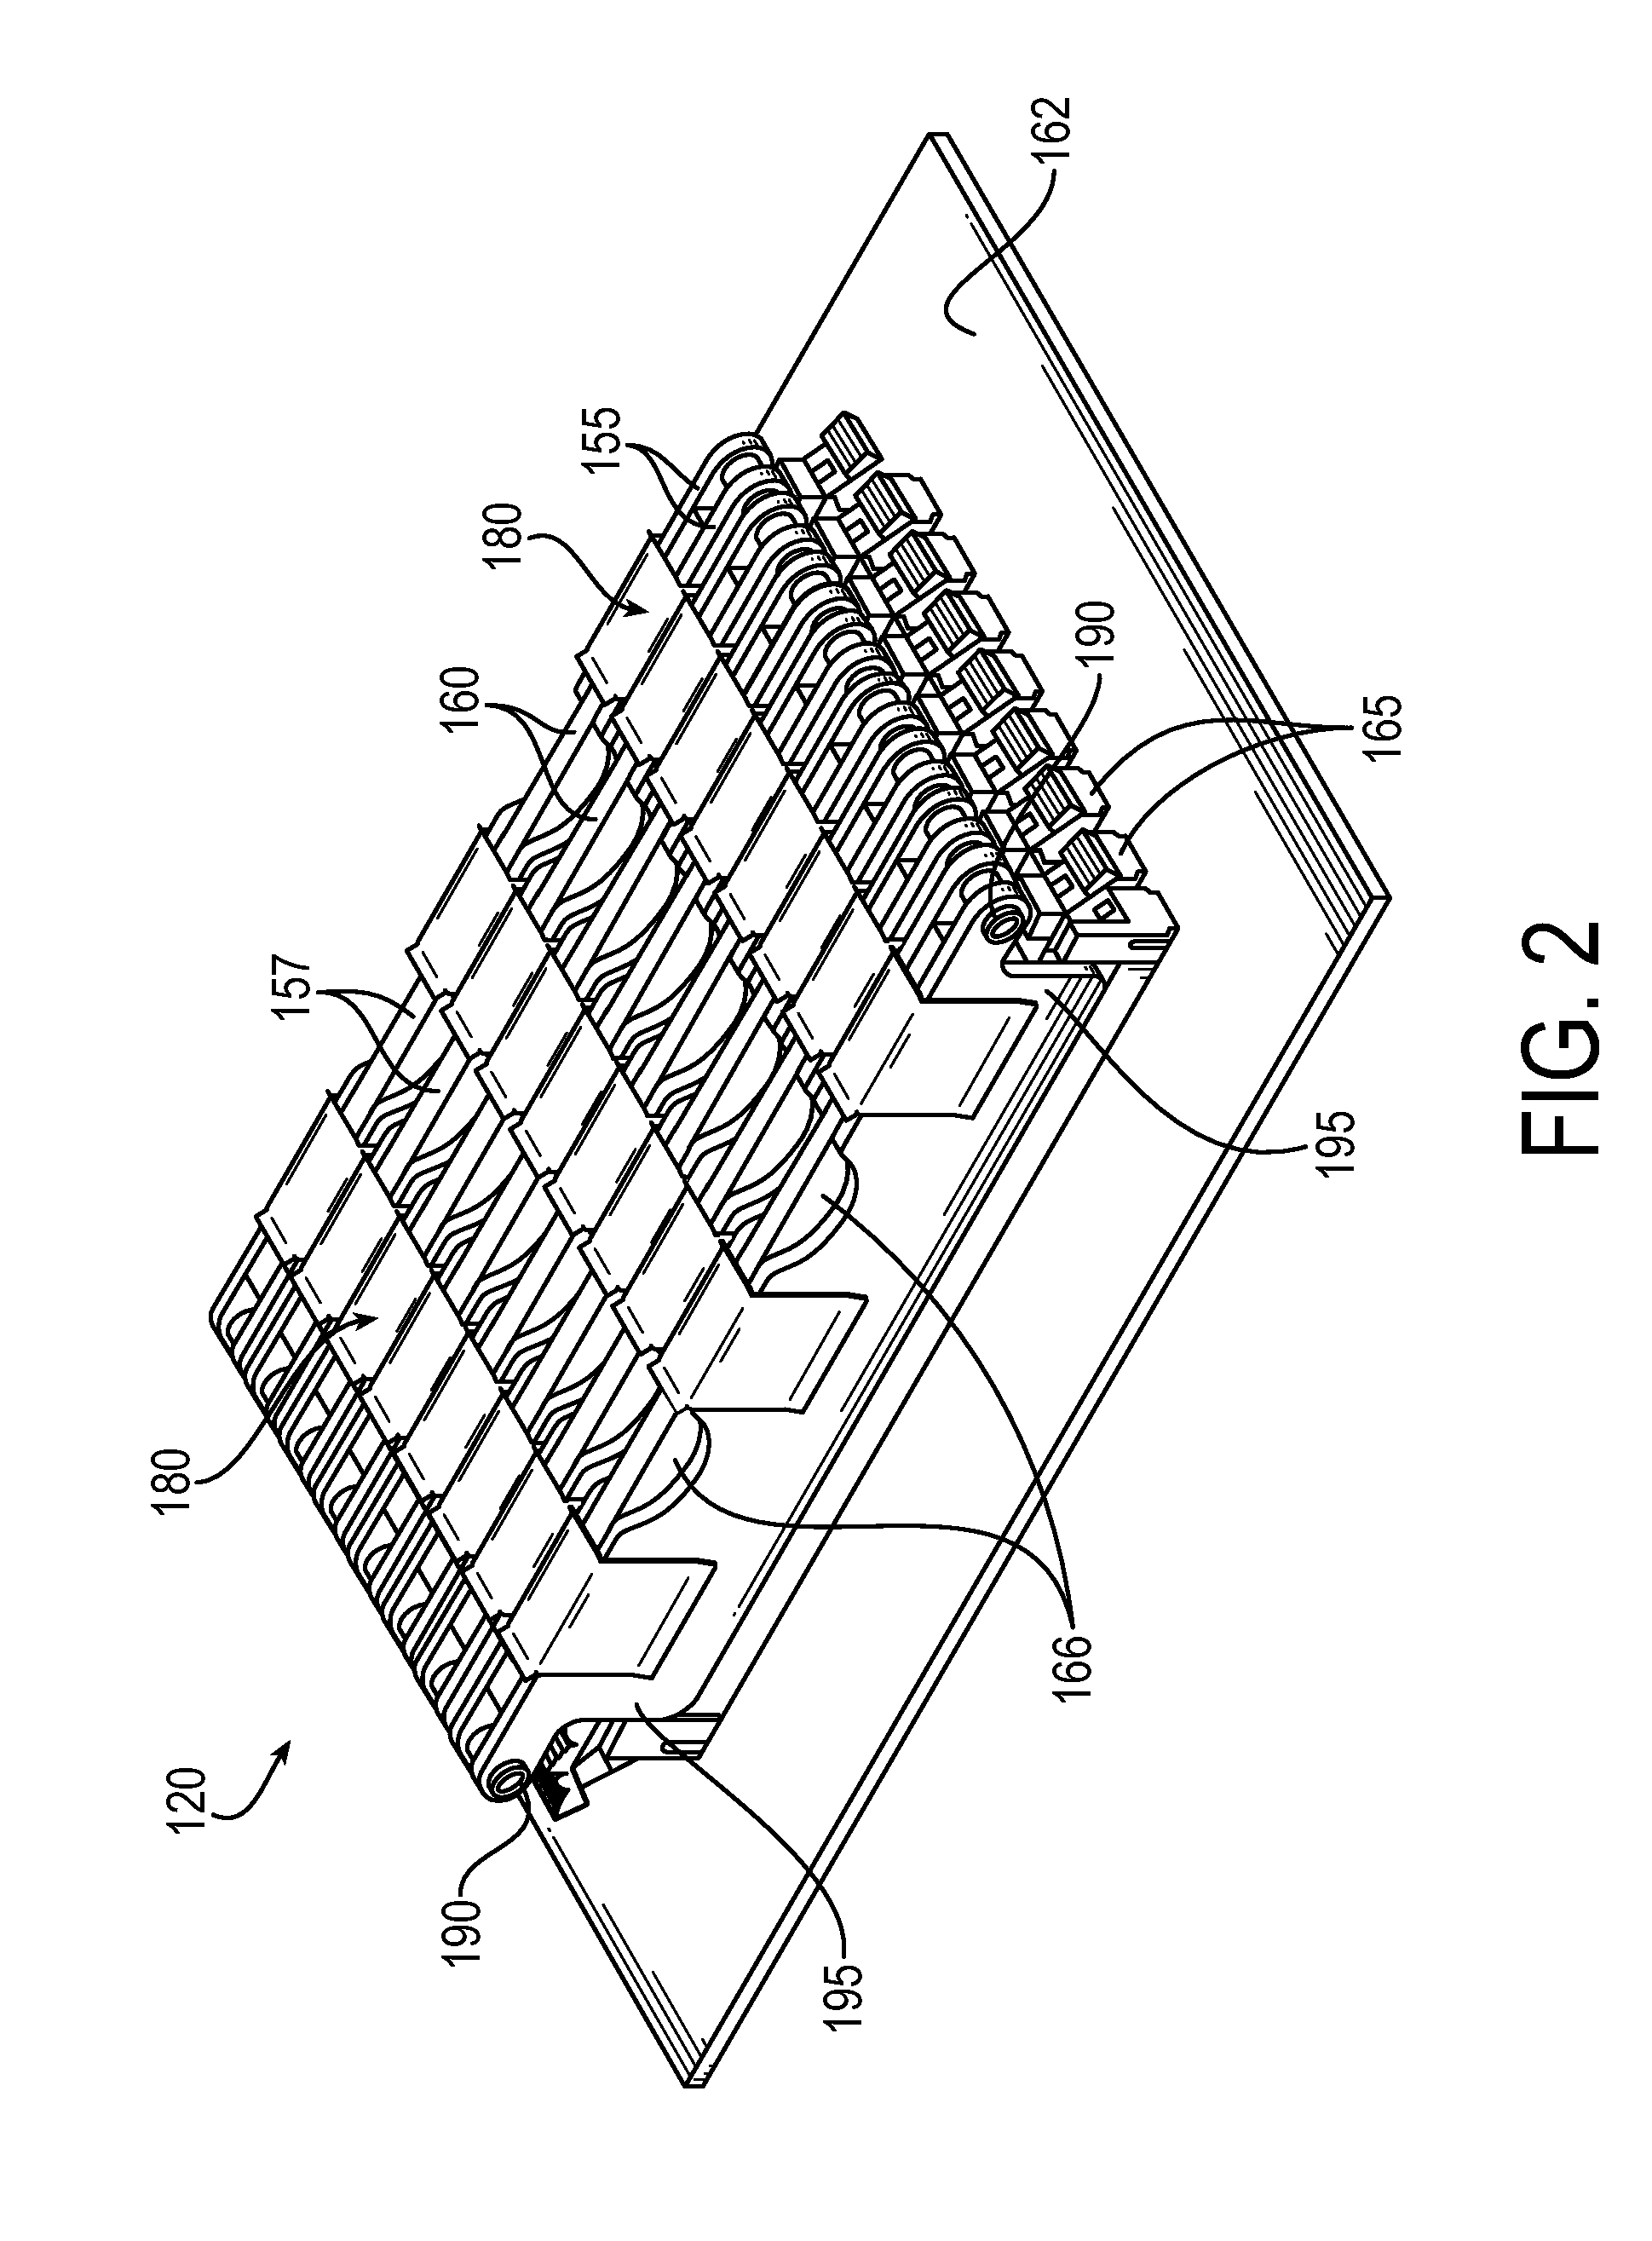 Apparatus and method for cooling random-access (RAM) modules